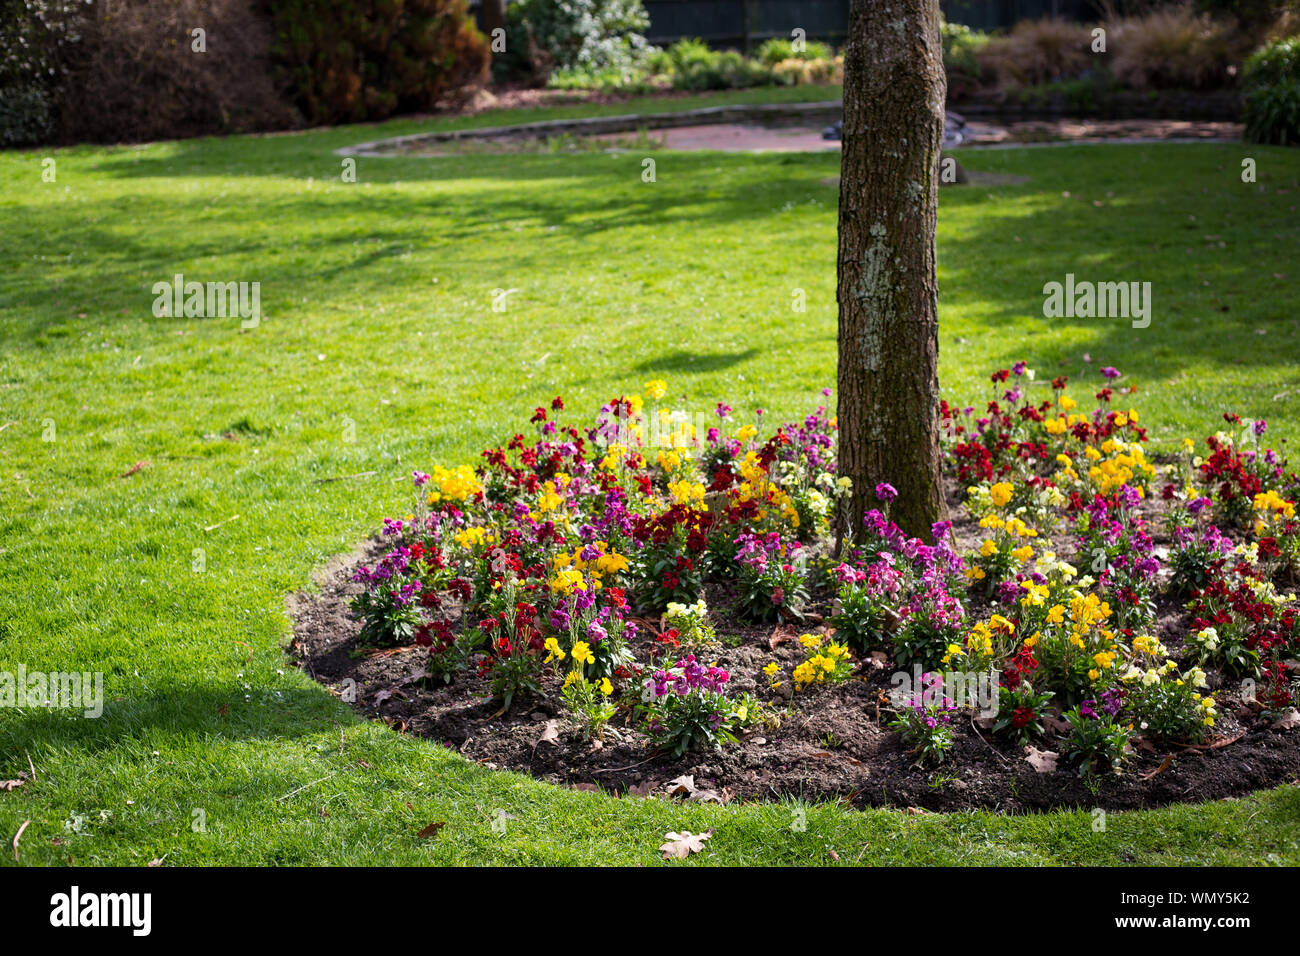 Pretty colorful and fragrant wallflowers growing at the base of trees in early spring, Edmonds Gardens, Christchurch, New Zealand Stock Photo